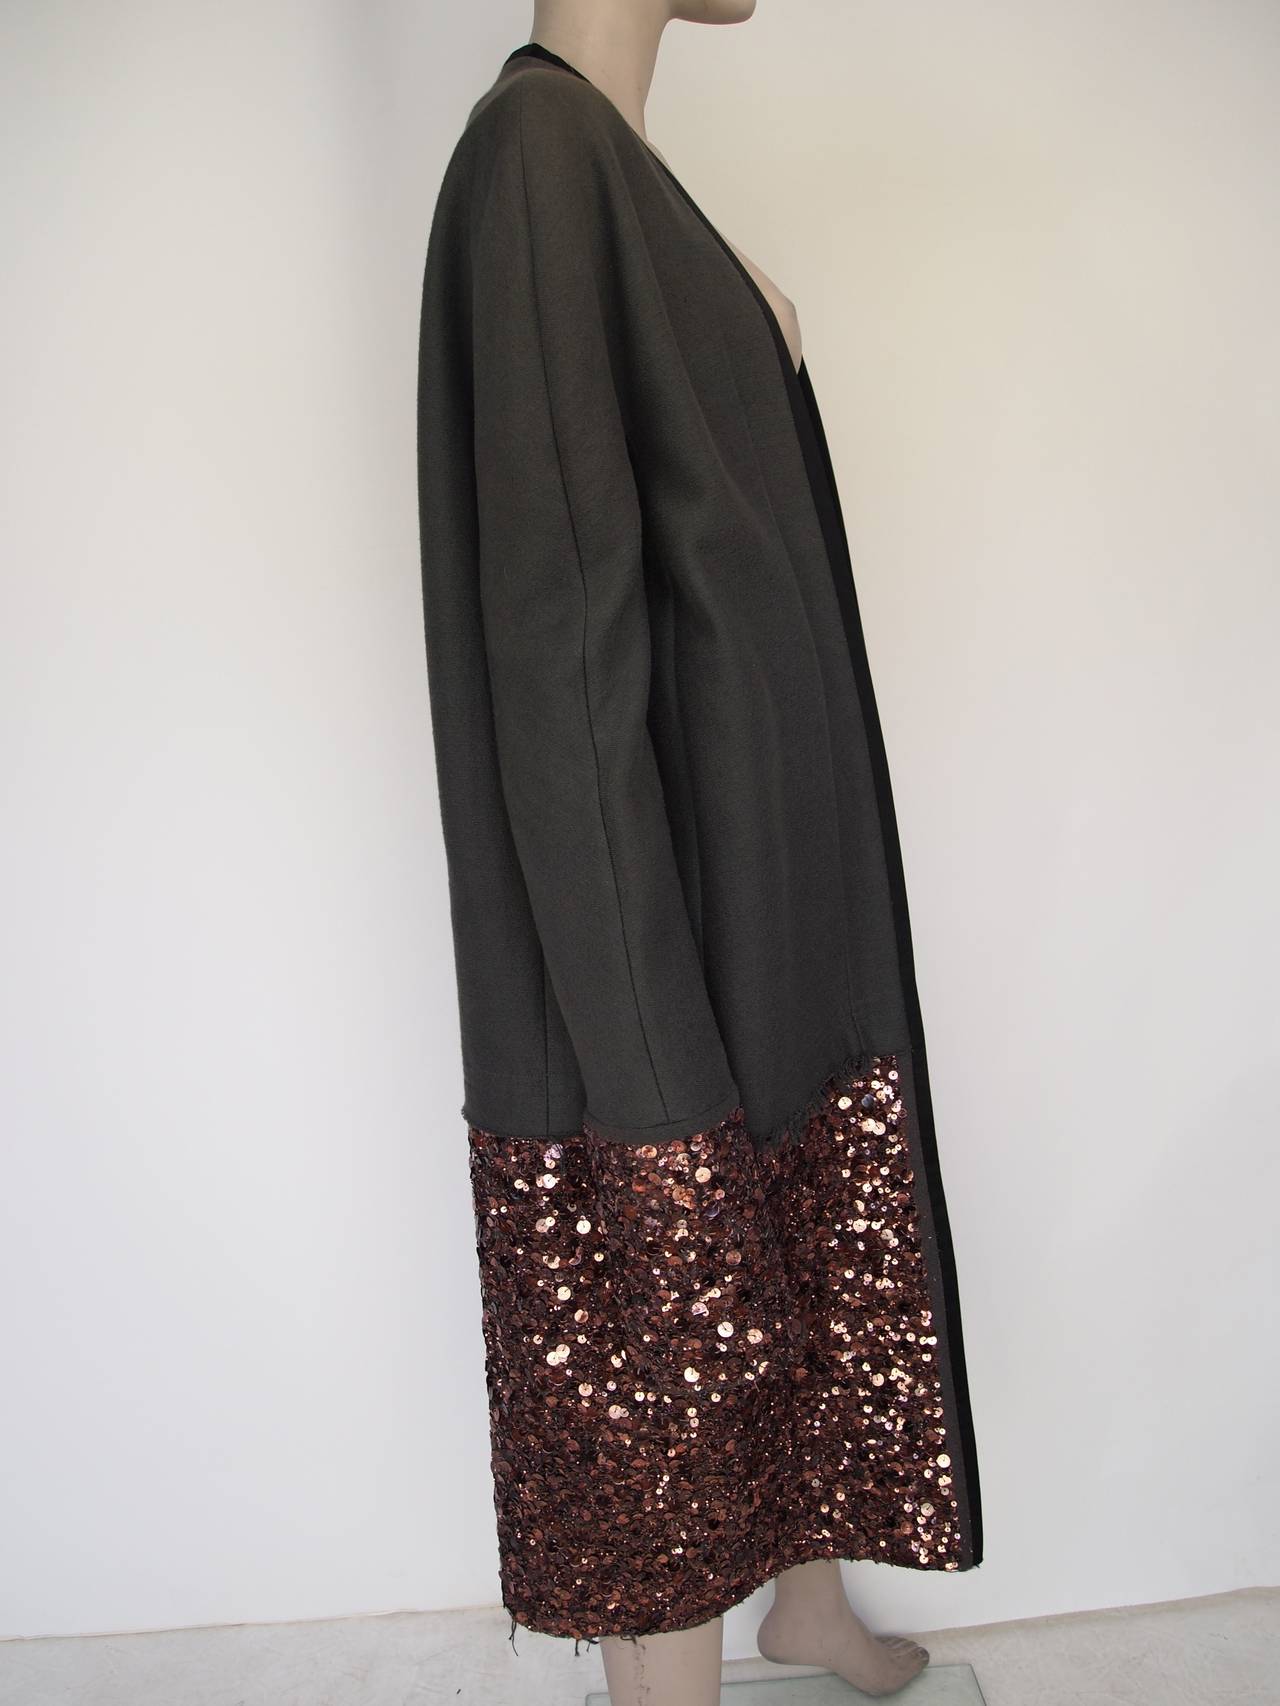 Haider Ackermann, Autumn/Winter 2011 wool coat with copper sequin embellishment and fully lined.